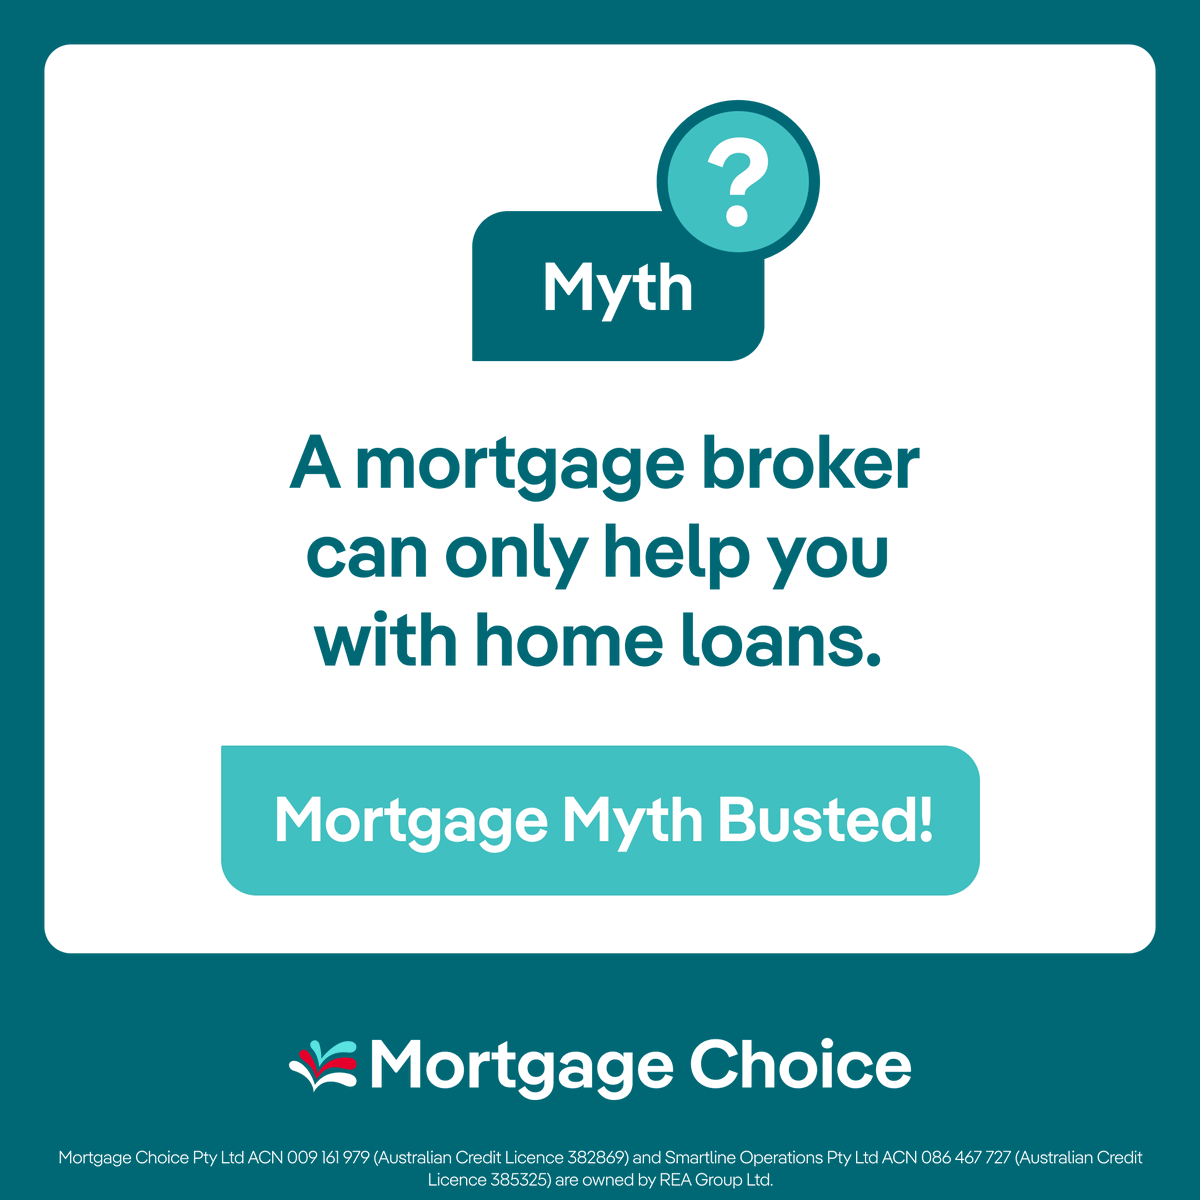 Myth Busted!

A mortgage broker can offer you a range of services, including car loans, business lending, property investment, and more.  

Talk to us today to find out how we can help👉 02 9653 9333.

#mythbusted #CarLoans #BusinessLending #PropertyInvestment #EquipmentFinance